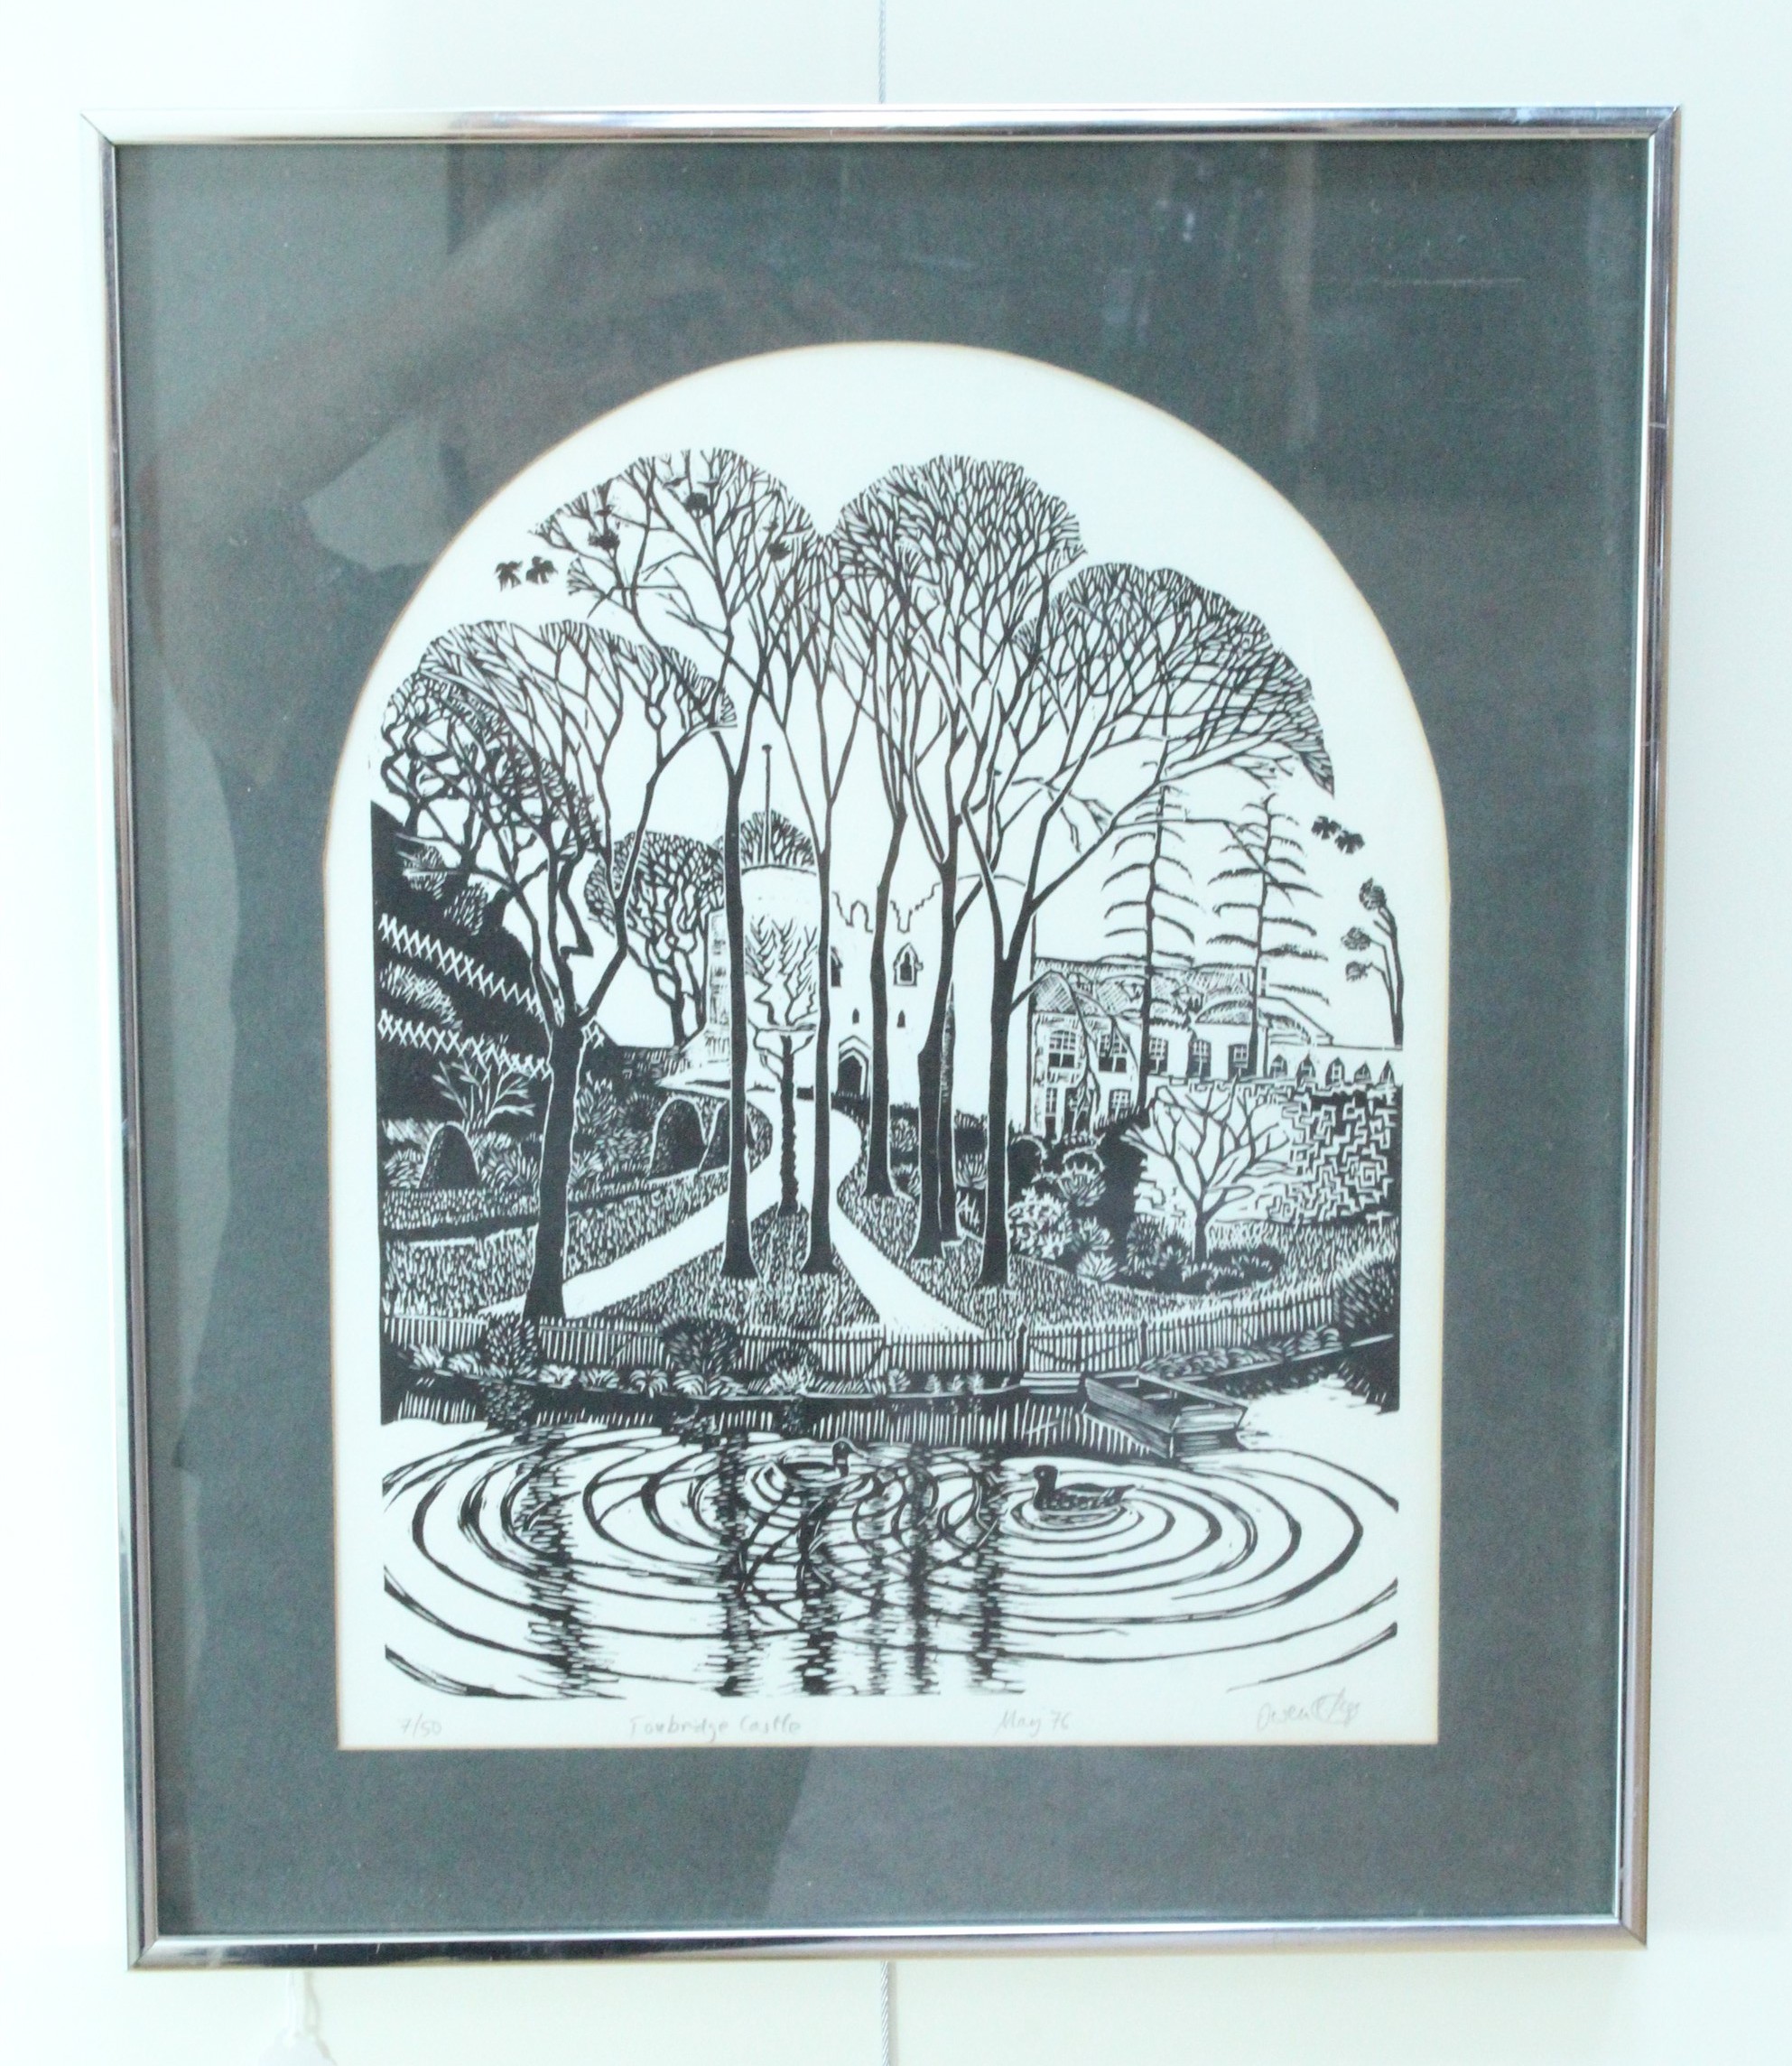 Tunbridge Castle 1970s linocut , limited edition, pencil signed and dated by the artist, mounted